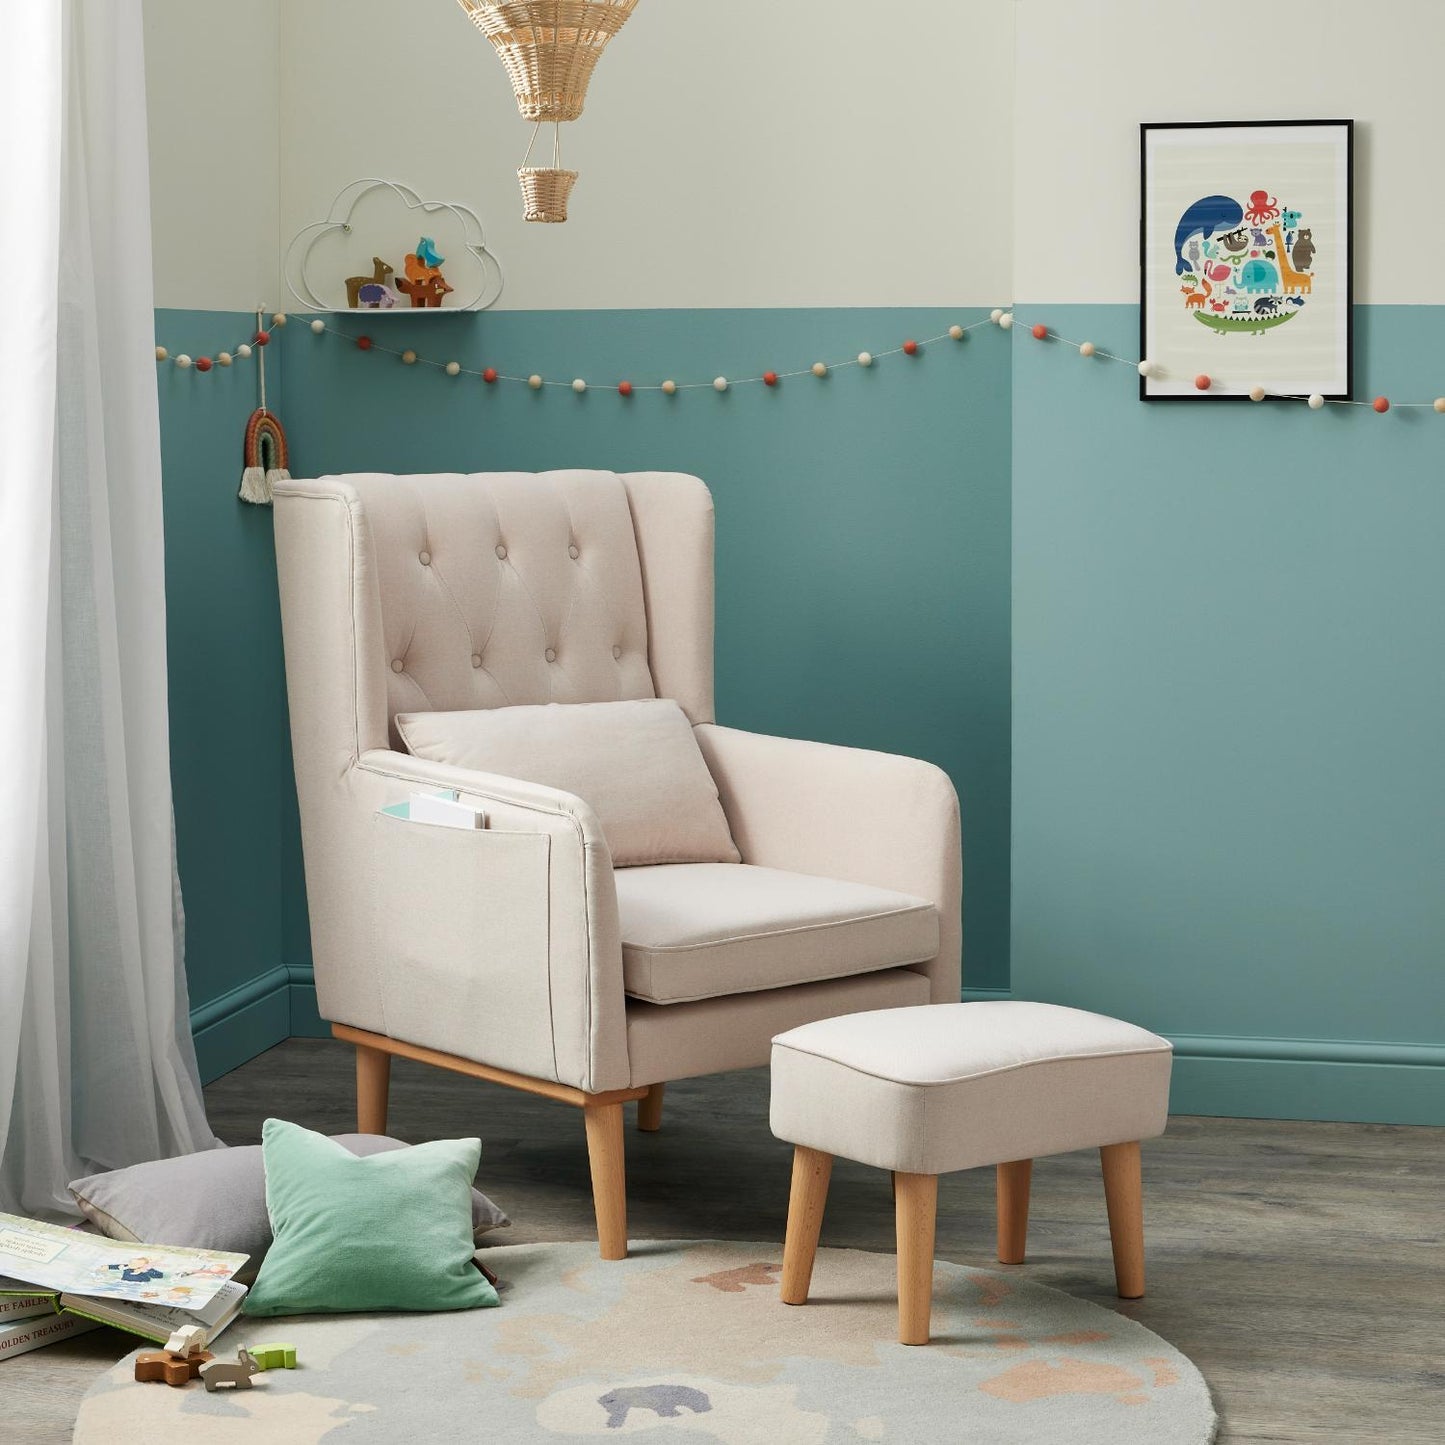 Babymore Lux Nursing Chair with Footstool - Gentle, Ergonomic, & Convertible